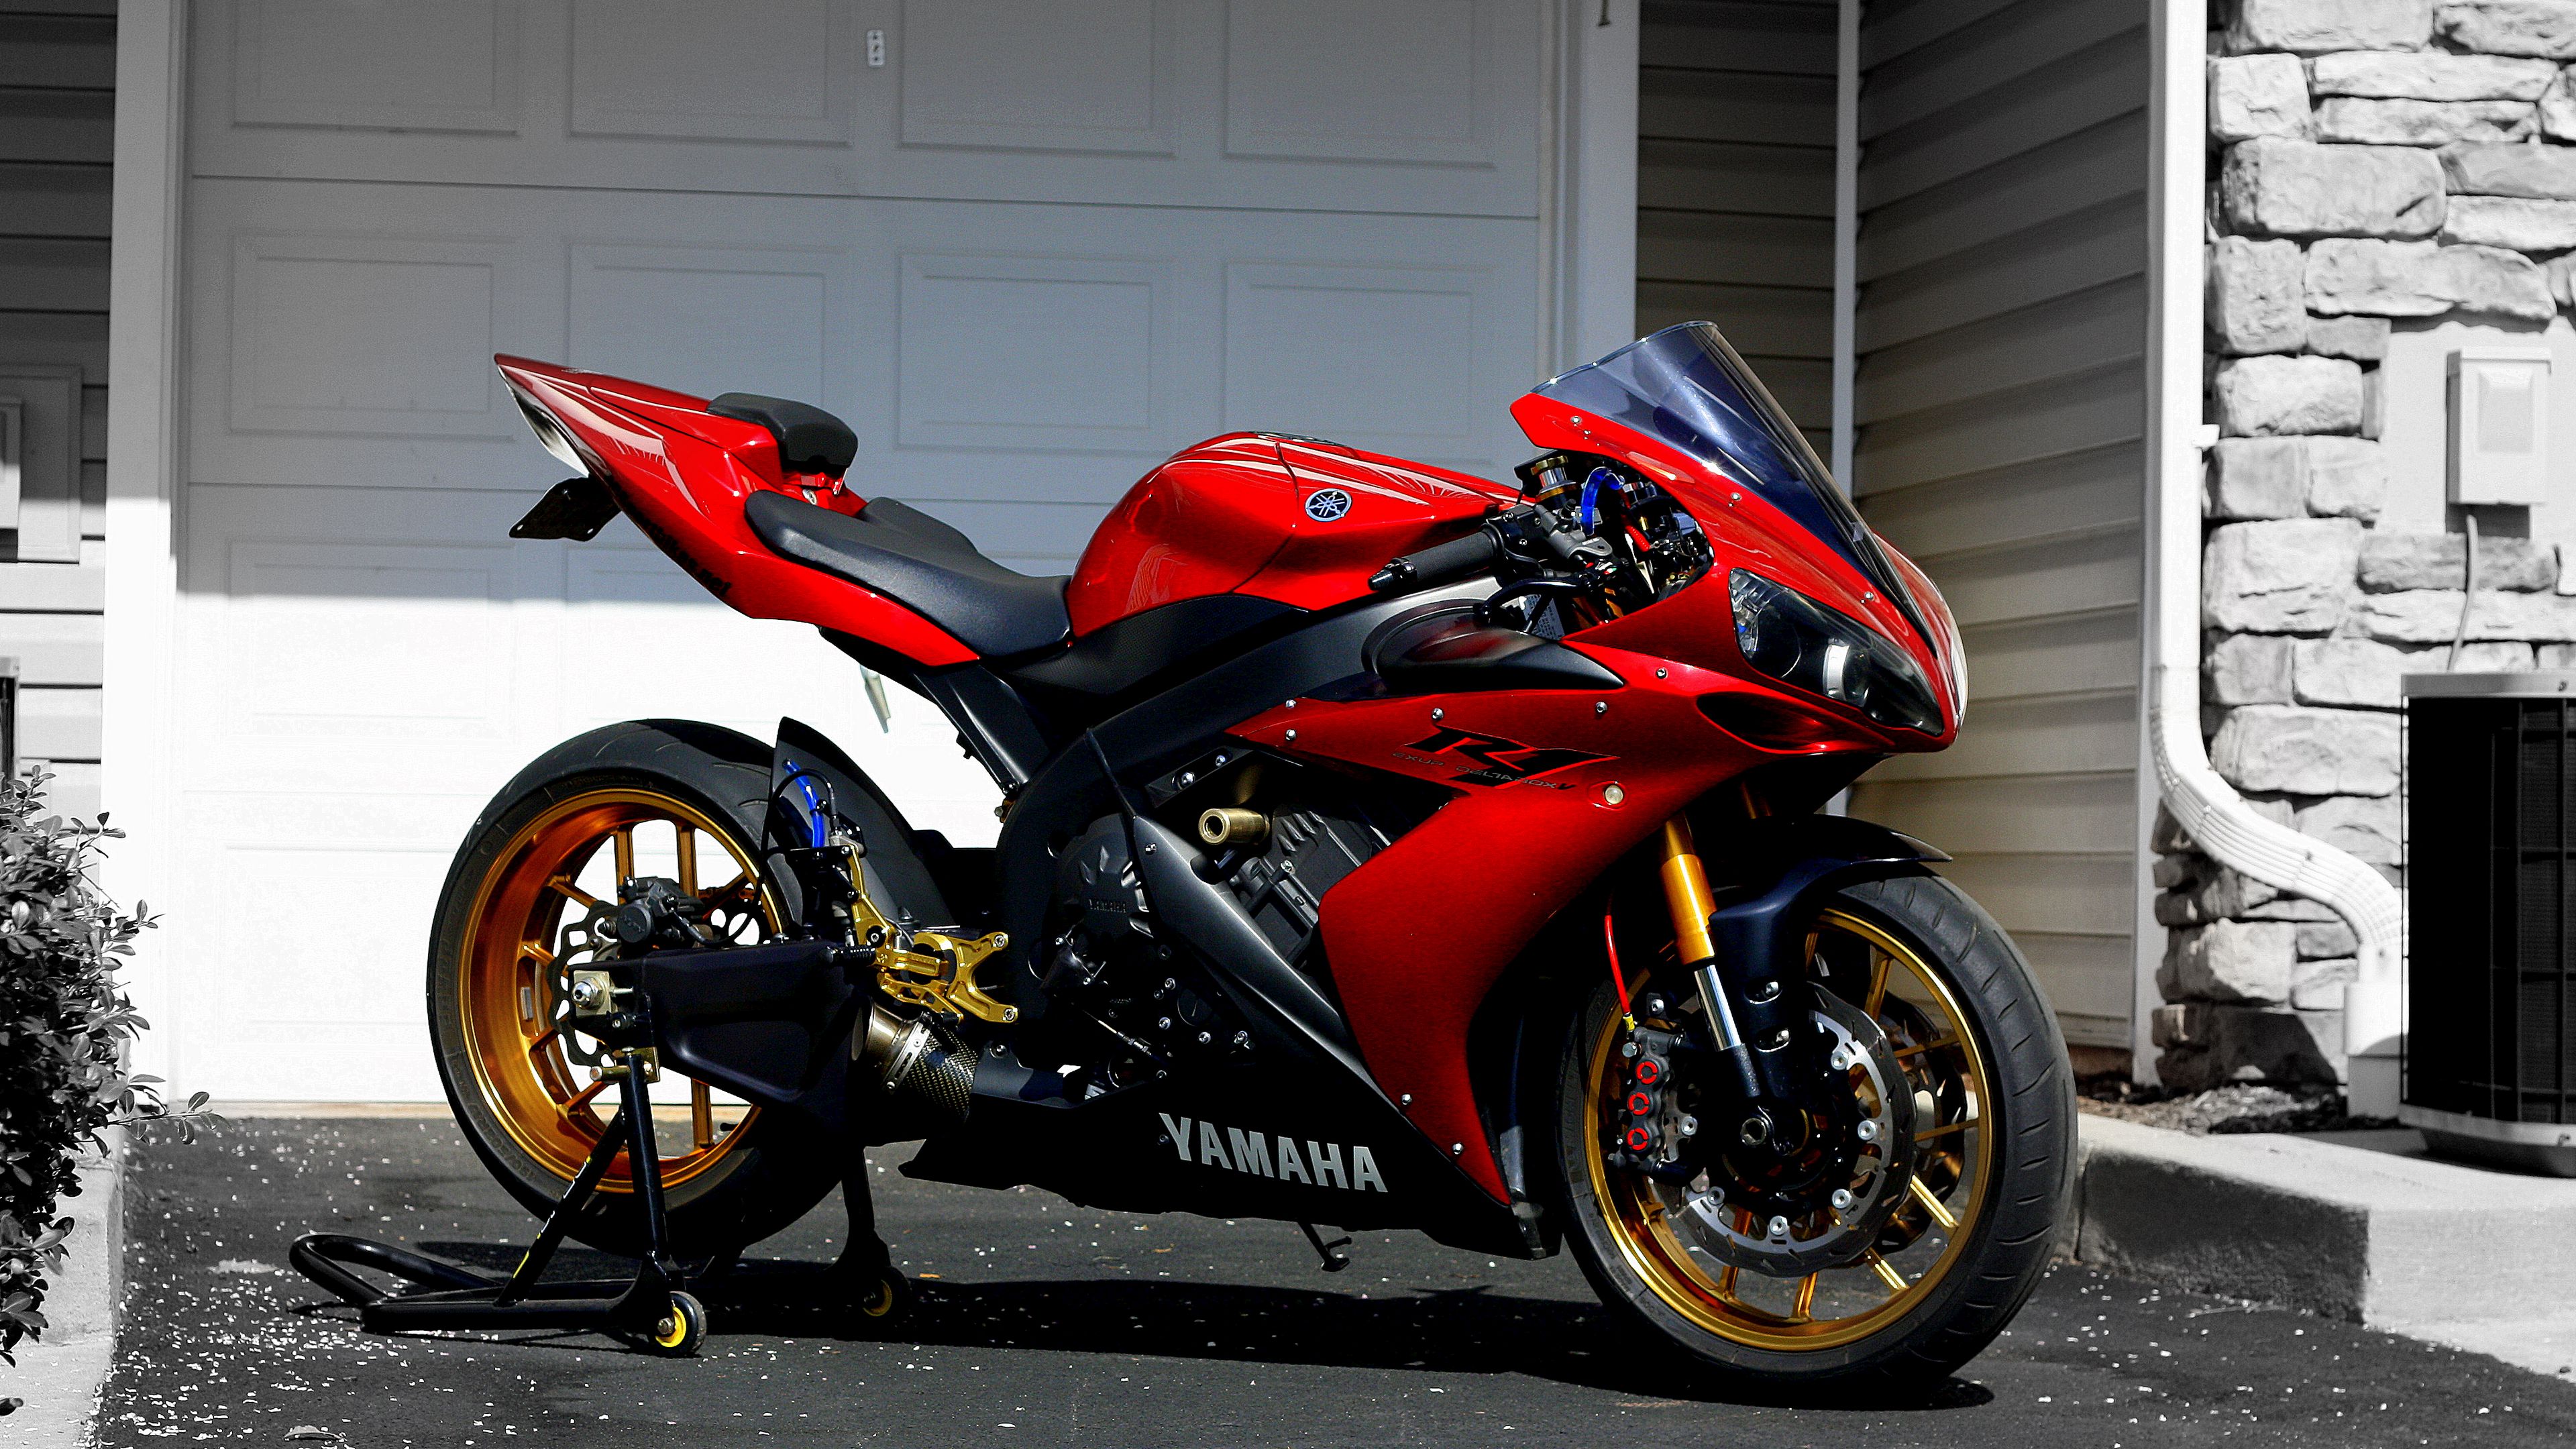 4k Wallpapers Of Yamaha YZF-R7 Bike For Free Download